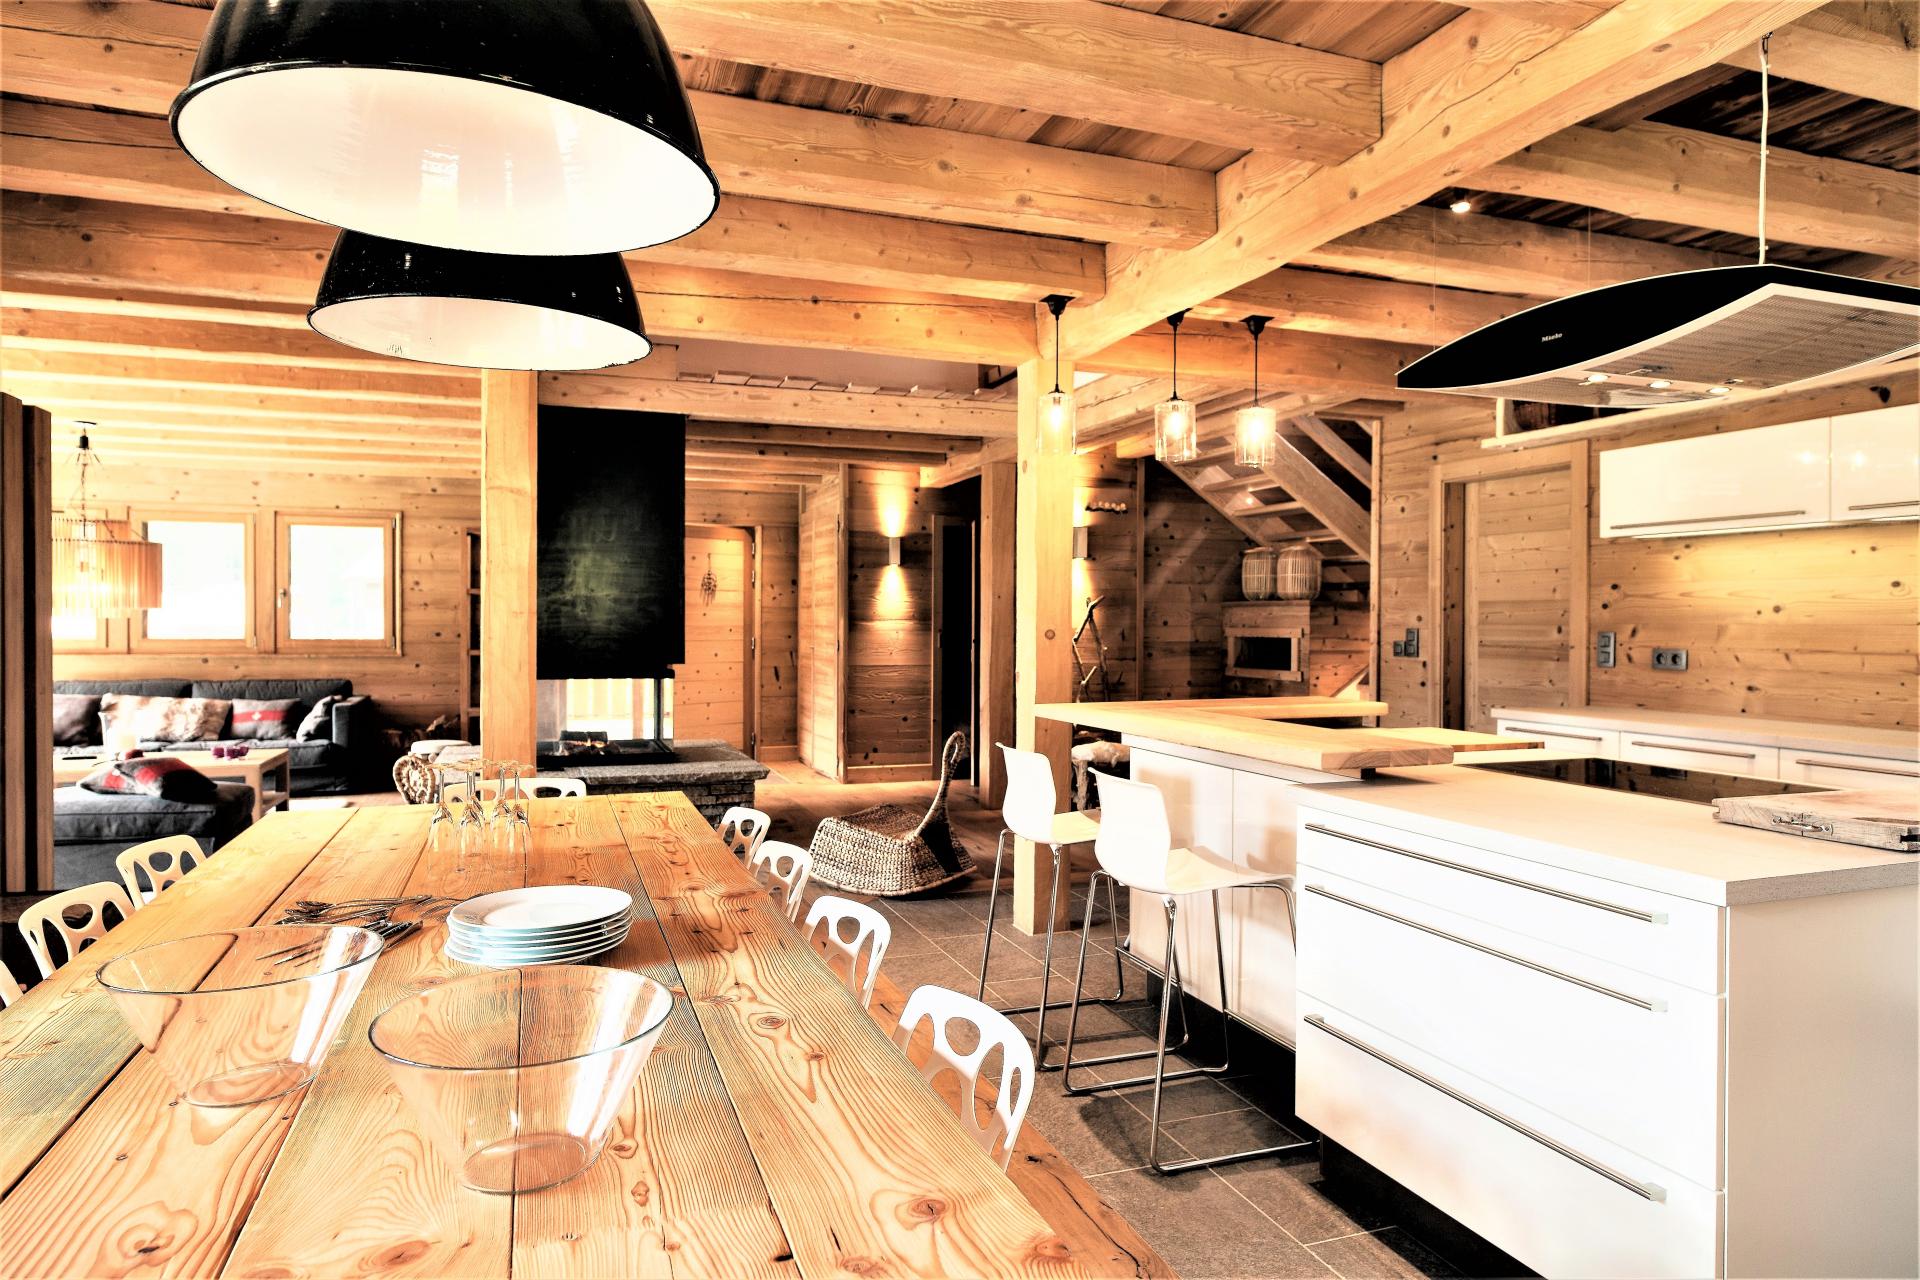 THE KITCHEN AND ITS DINING AREA IN A CHALET RENTAL IN CHAMONIX